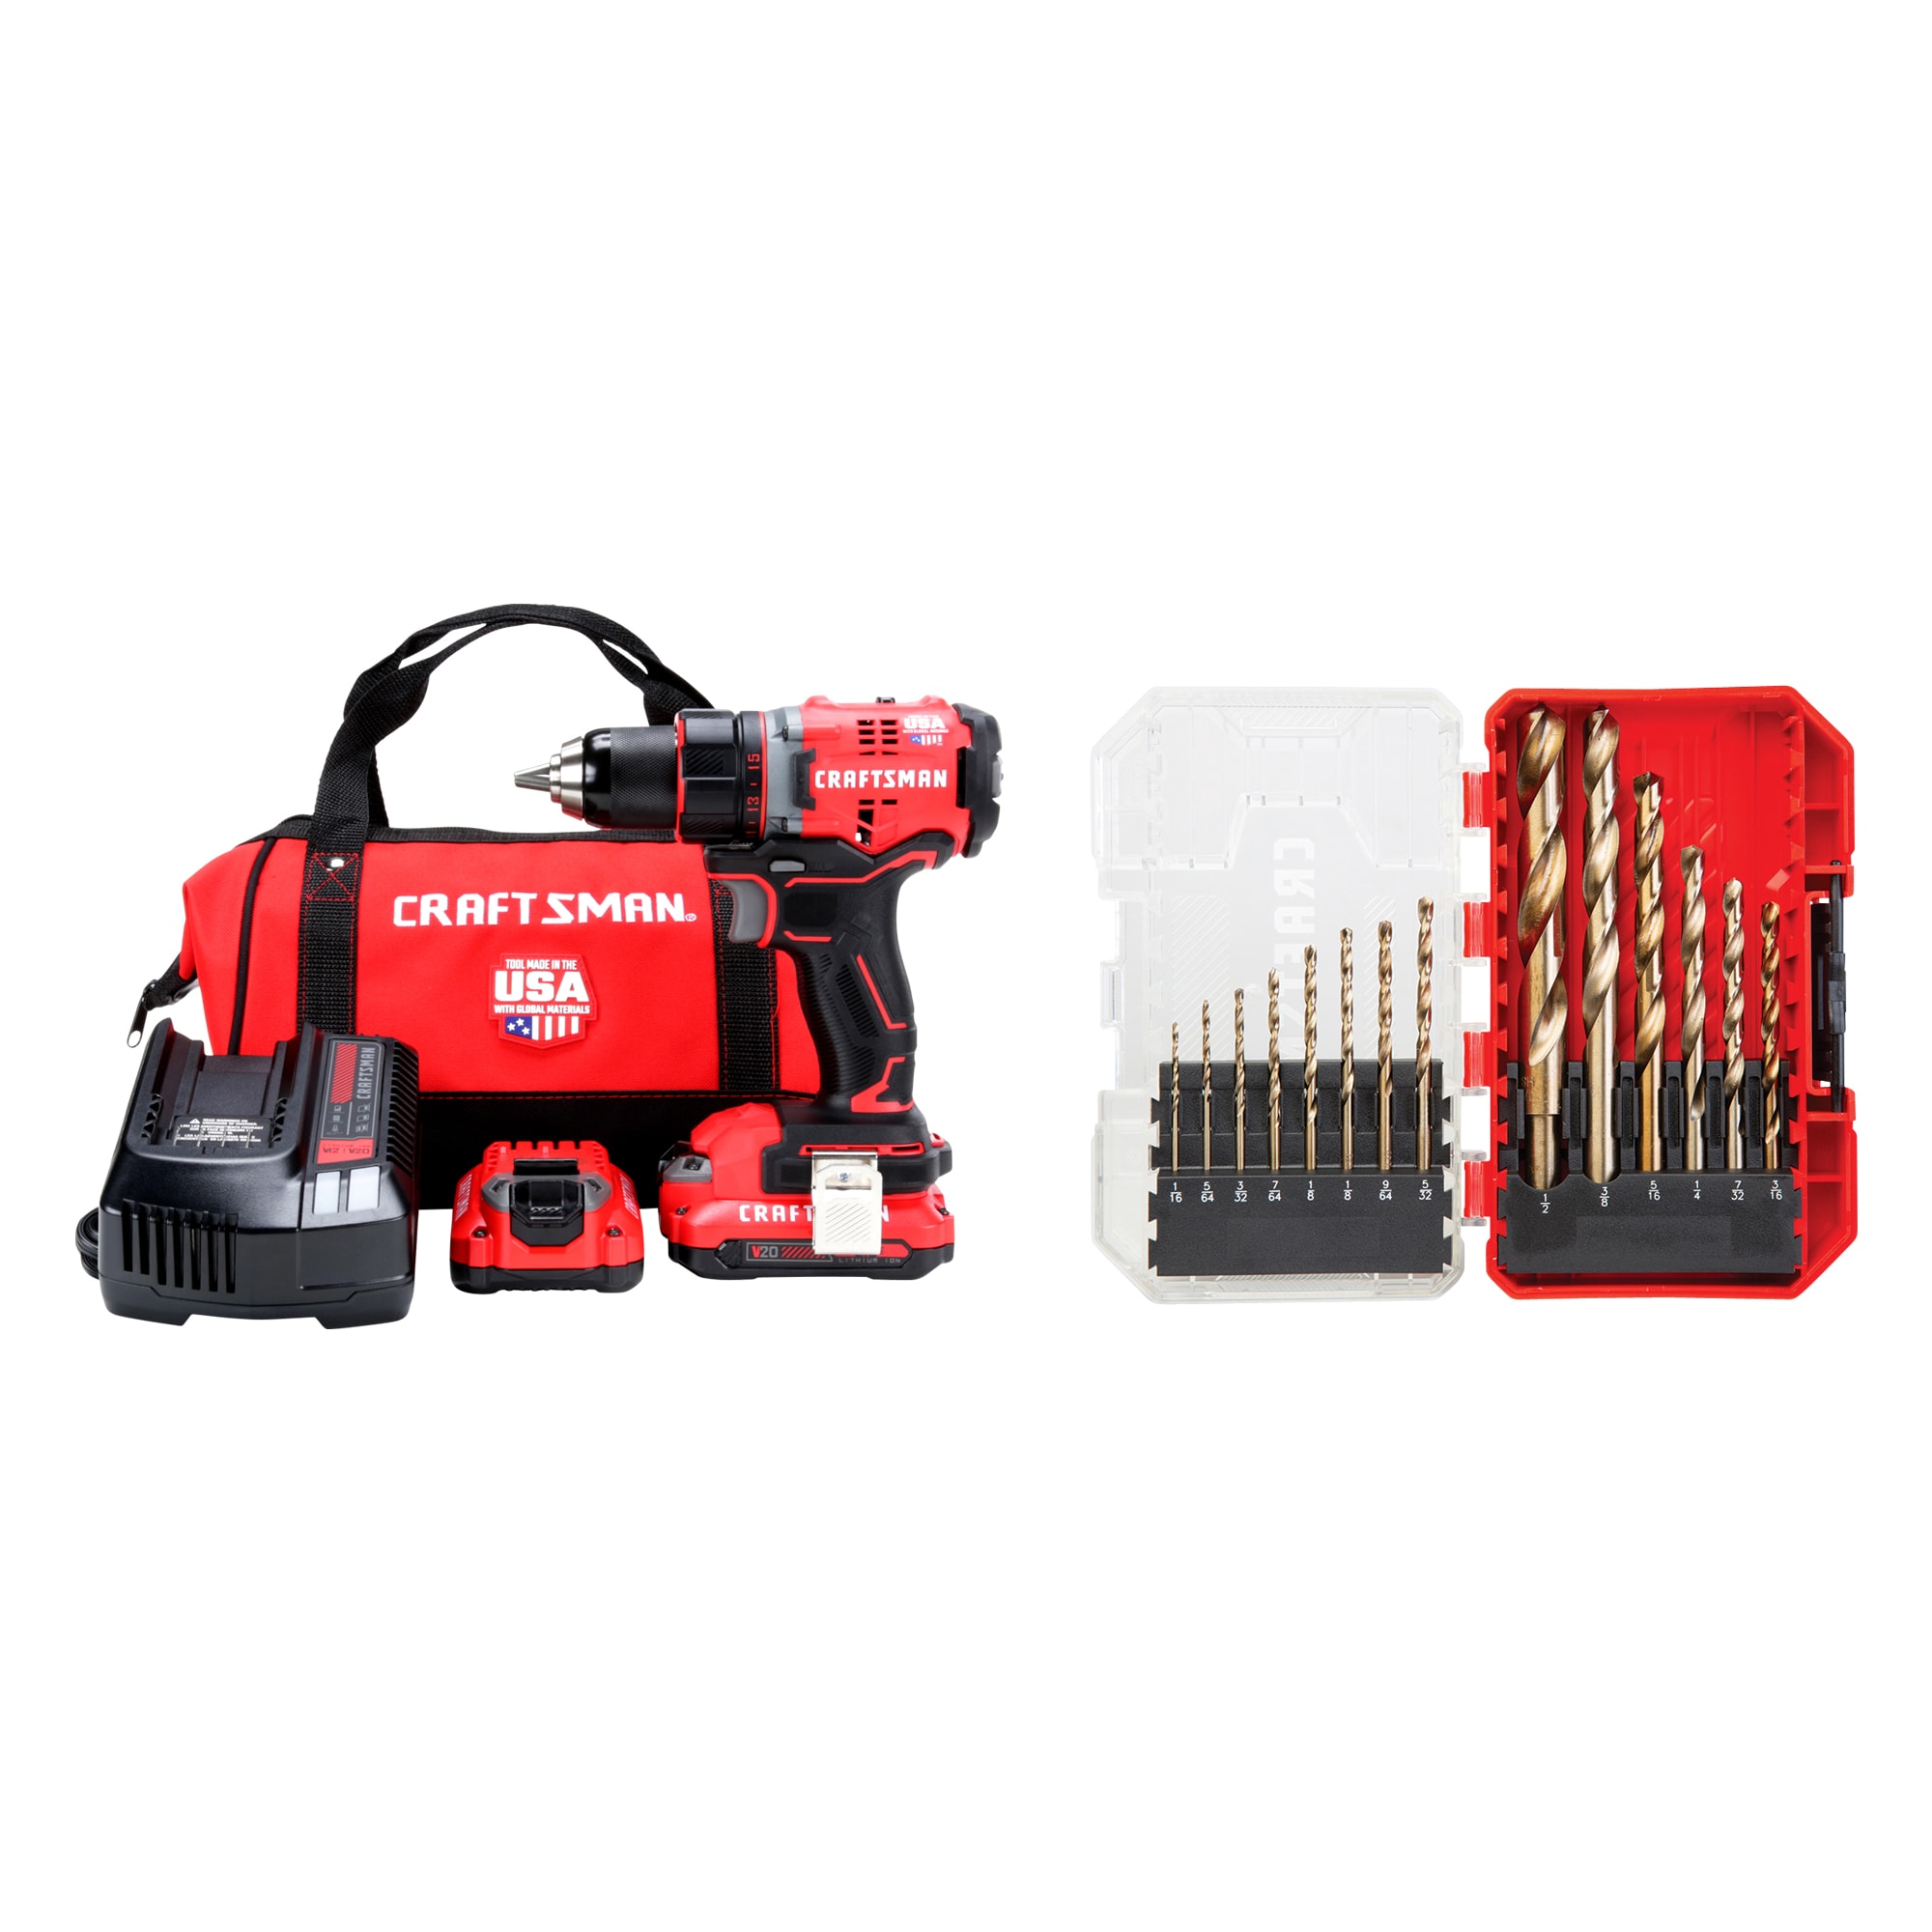 CRAFTSMAN V20 20-volt Max 1/2-in Brushless Cordless Drill (2-Batteries Included and Charger Included) & 14-Piece Assorted Assorted x Set Gold Ferrous